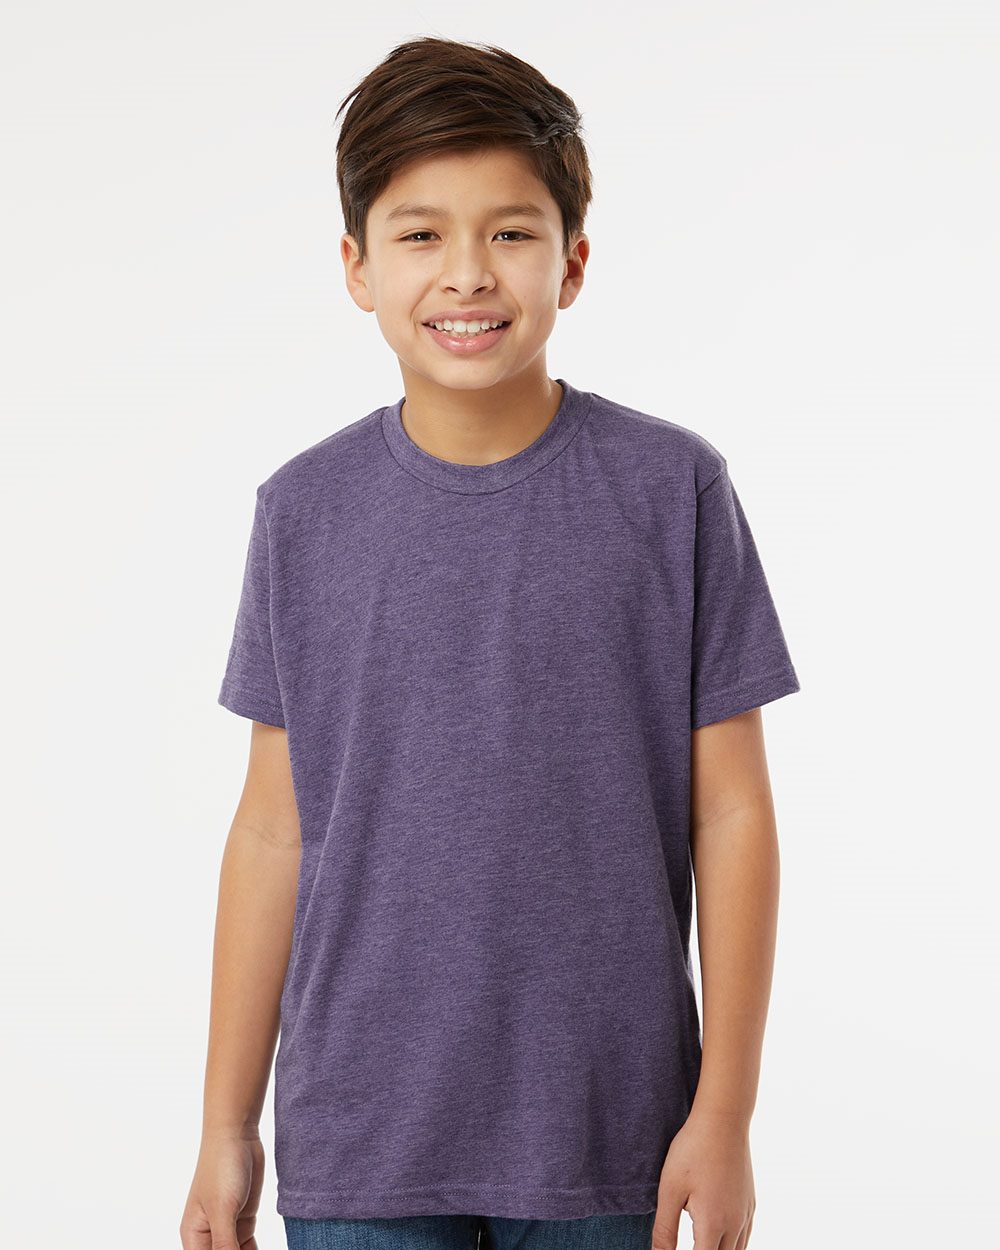 Youth Deluxe Blend T-Shirt - 3544 - 3544M